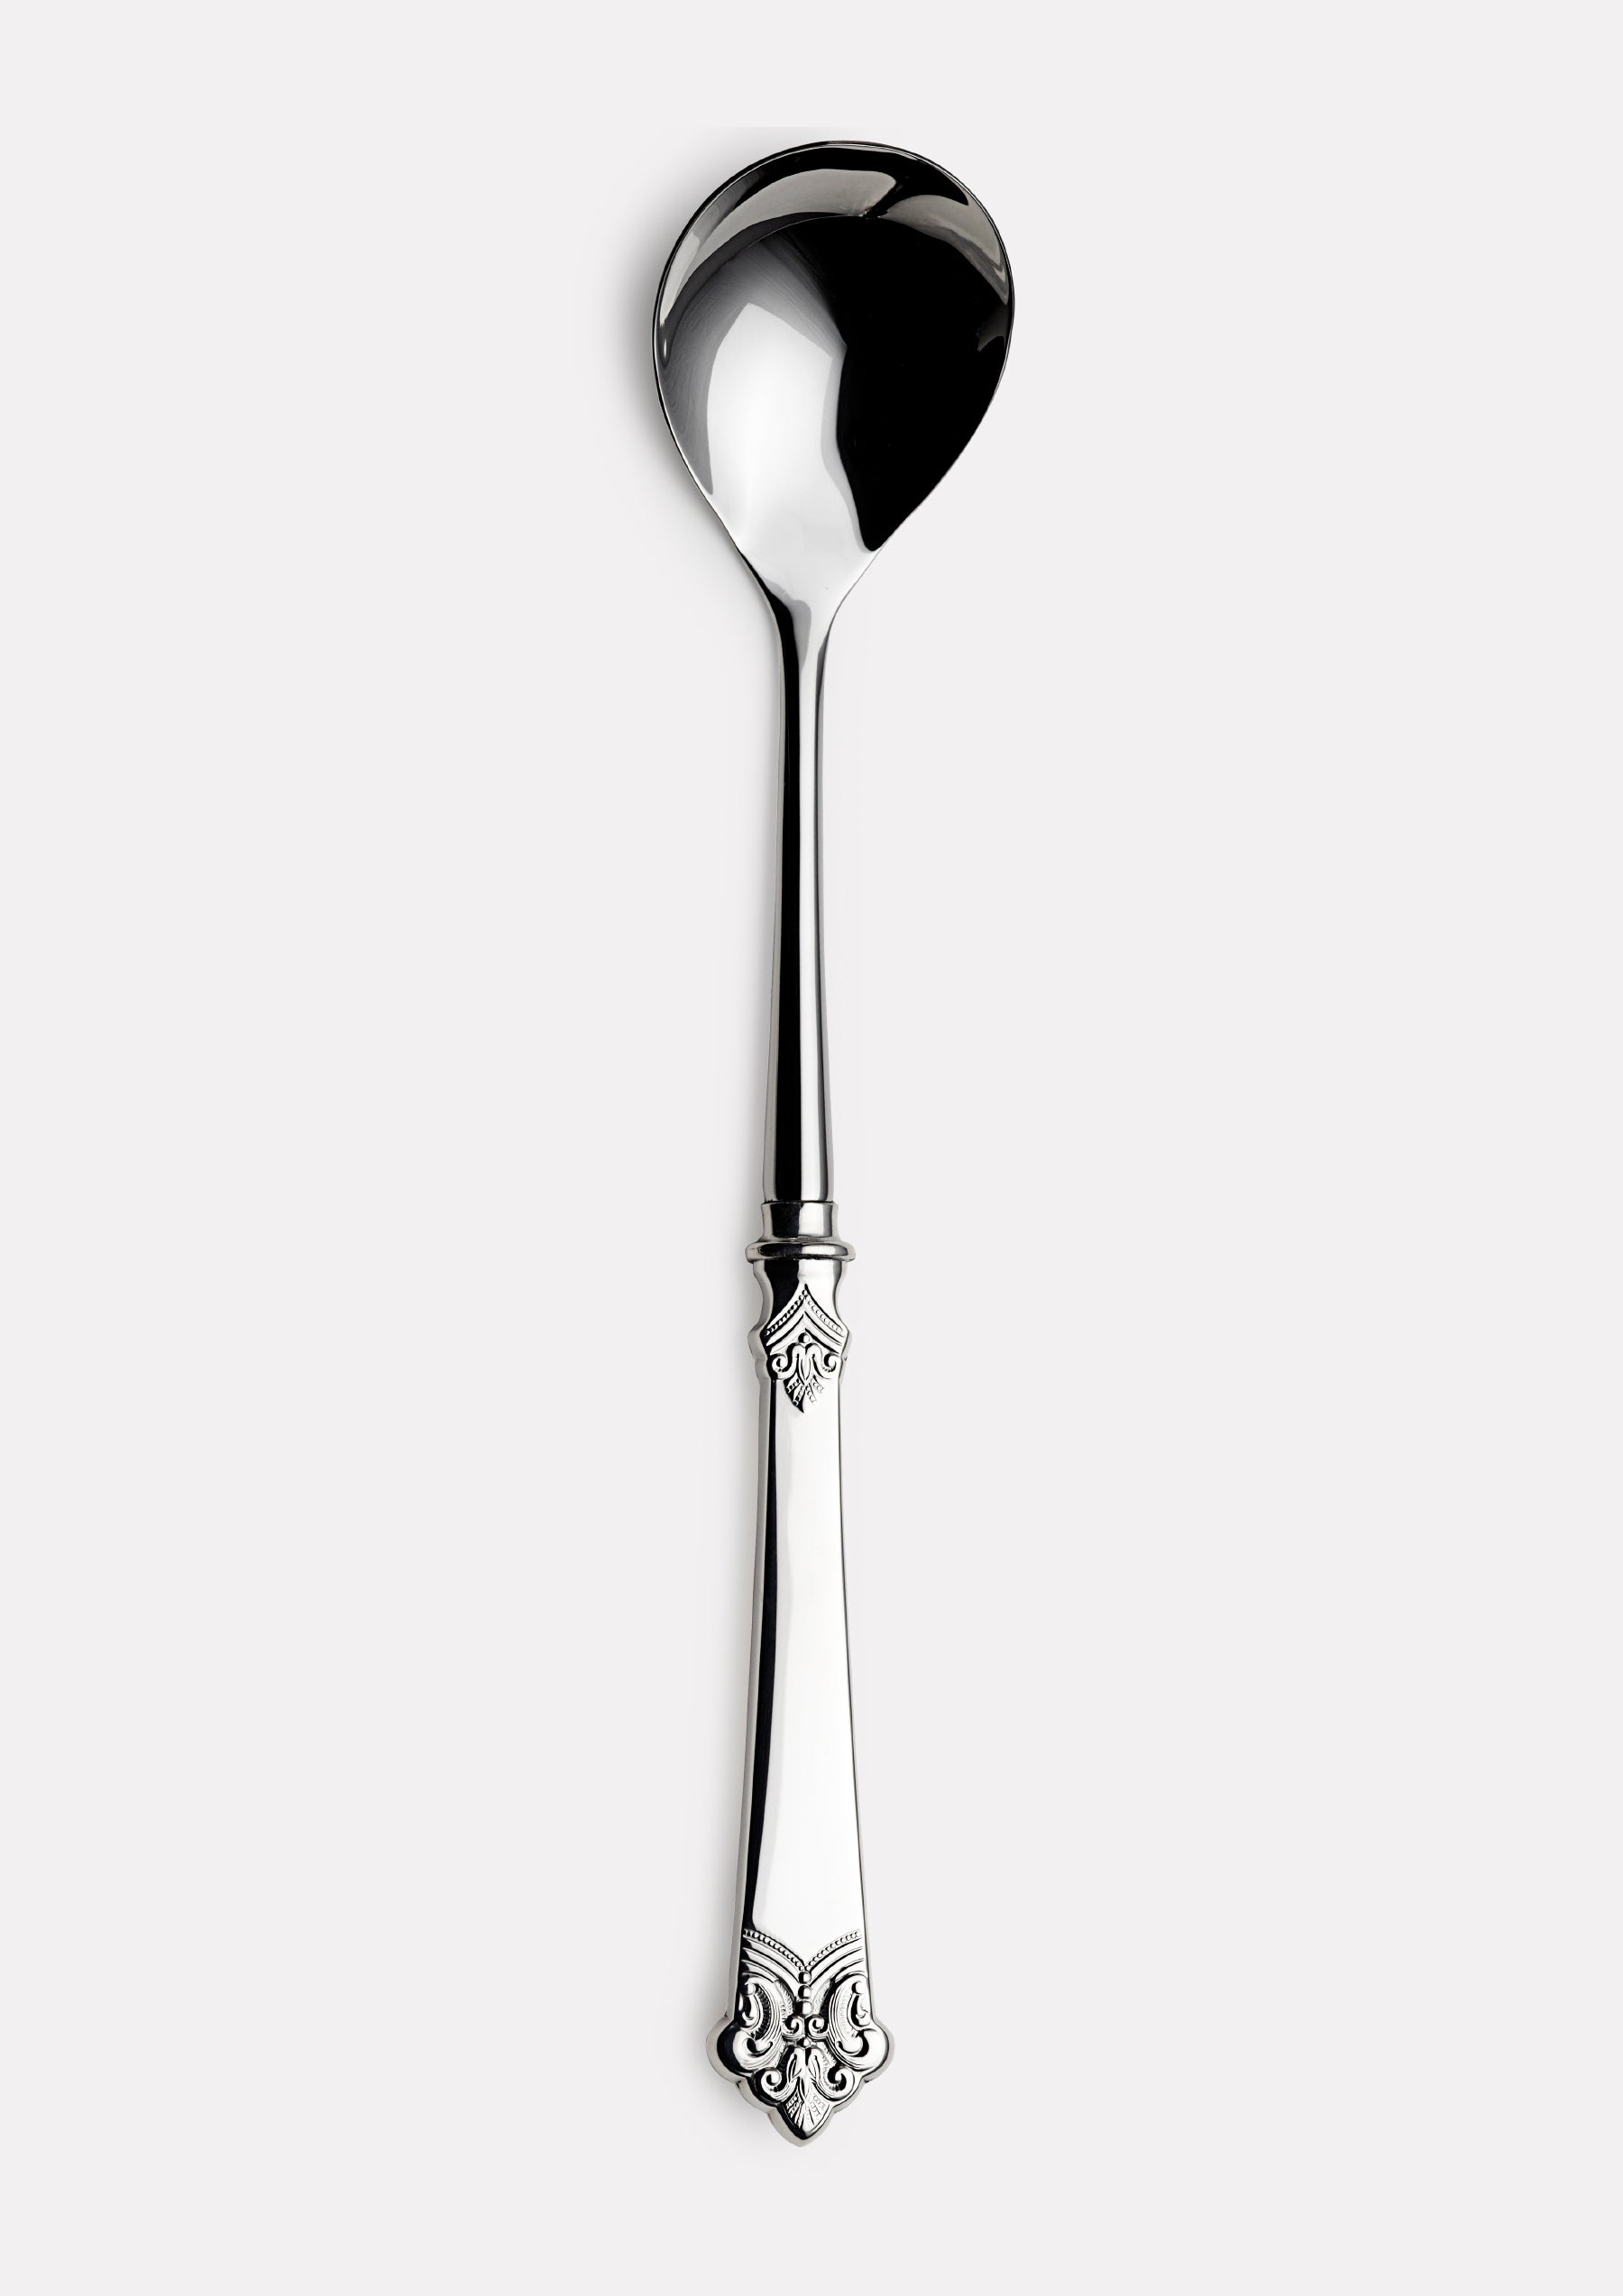 Anitra salad spoon with steel blade